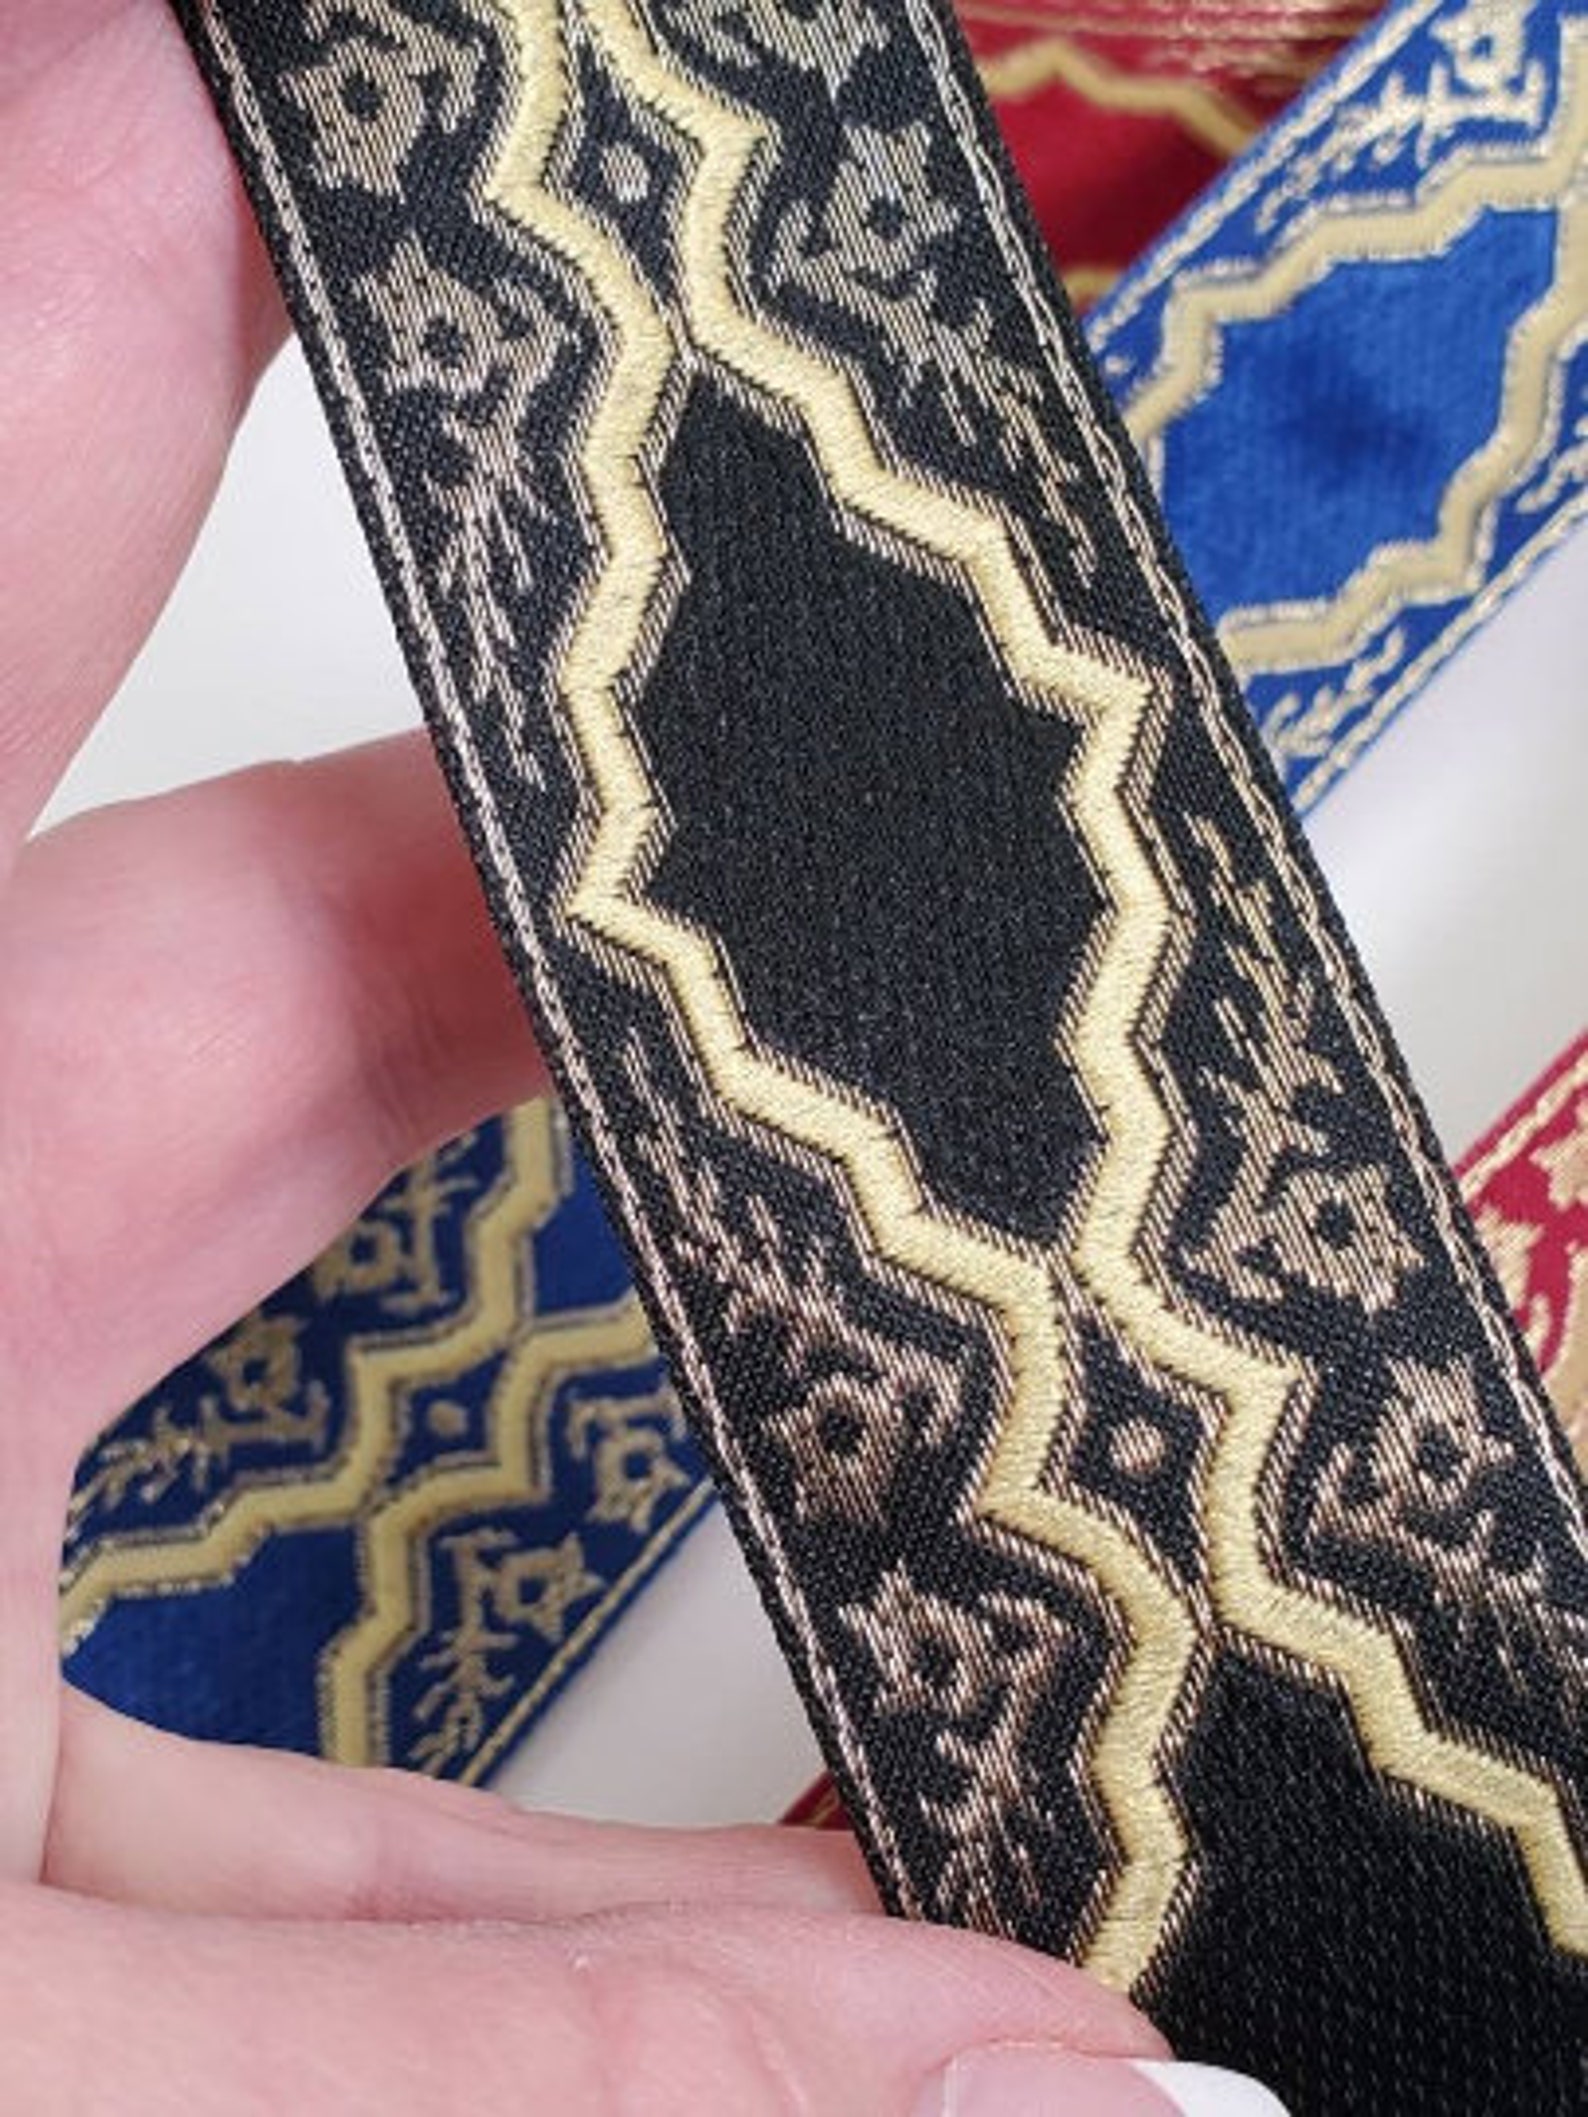 Medieval gold Jacquard fabric trim 1 1/4 inch wide sold by | Etsy